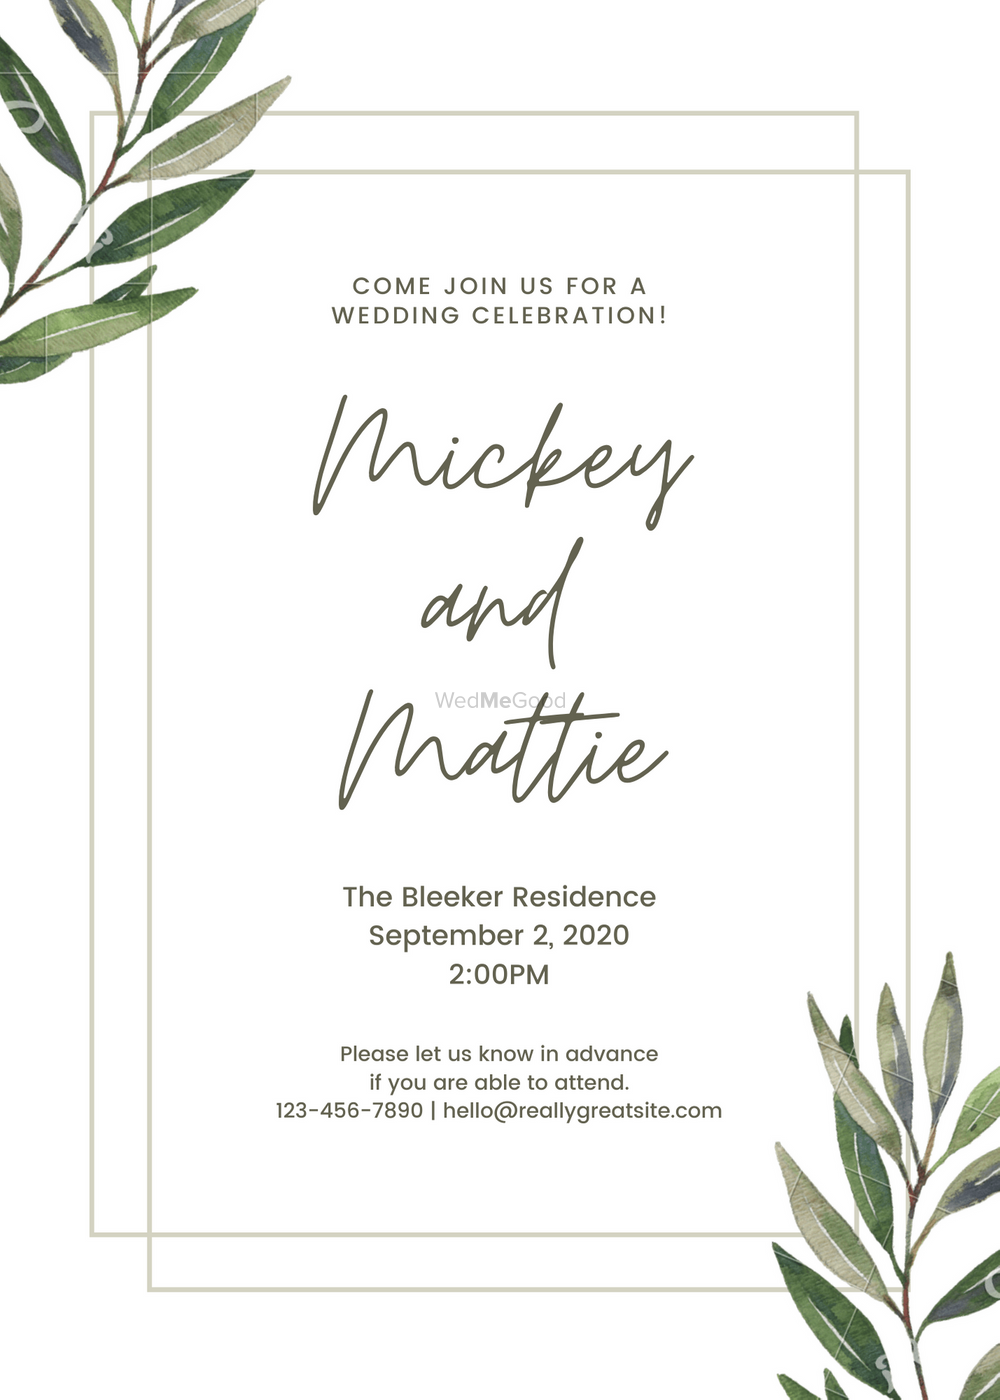 Photo By Design Deckers - Invitations